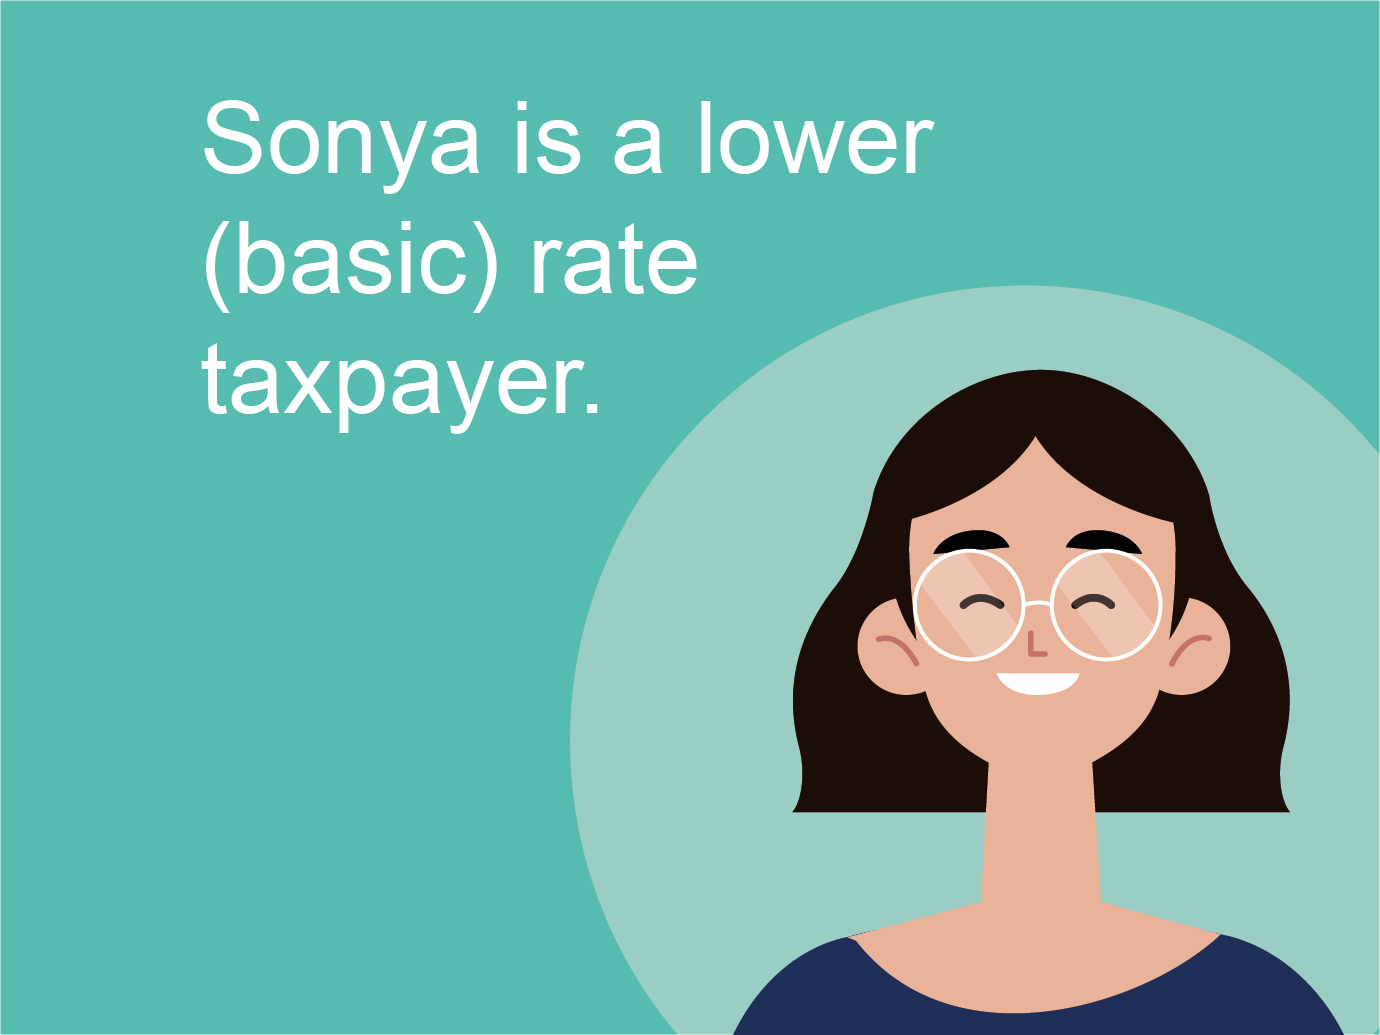 Sonya is a lower (basic) rate taxpayer.